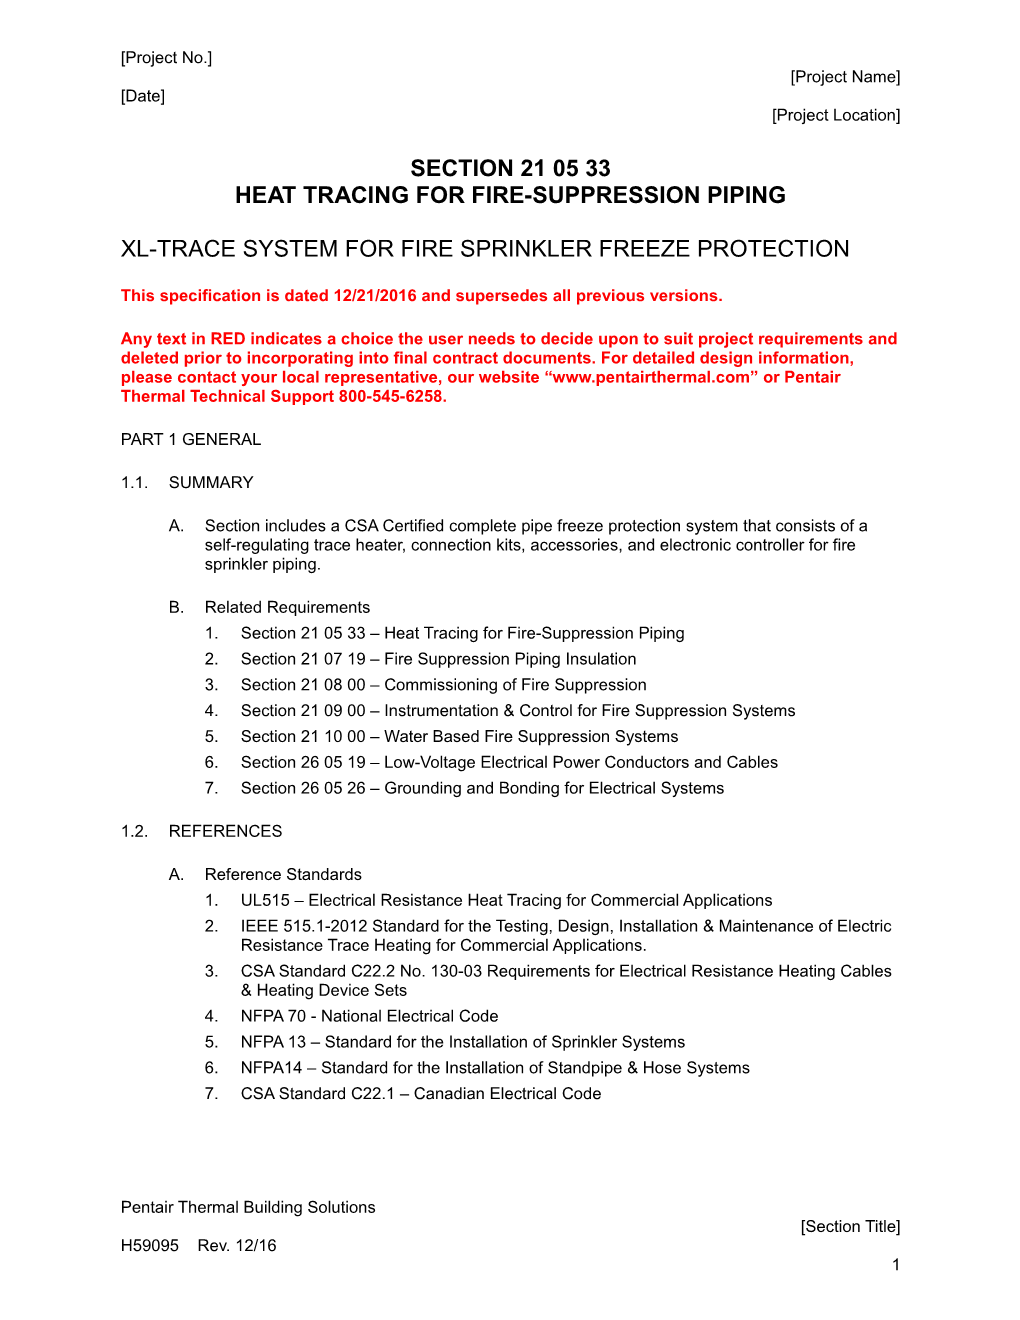 Fire Sprinkler Freeze Protection Specification